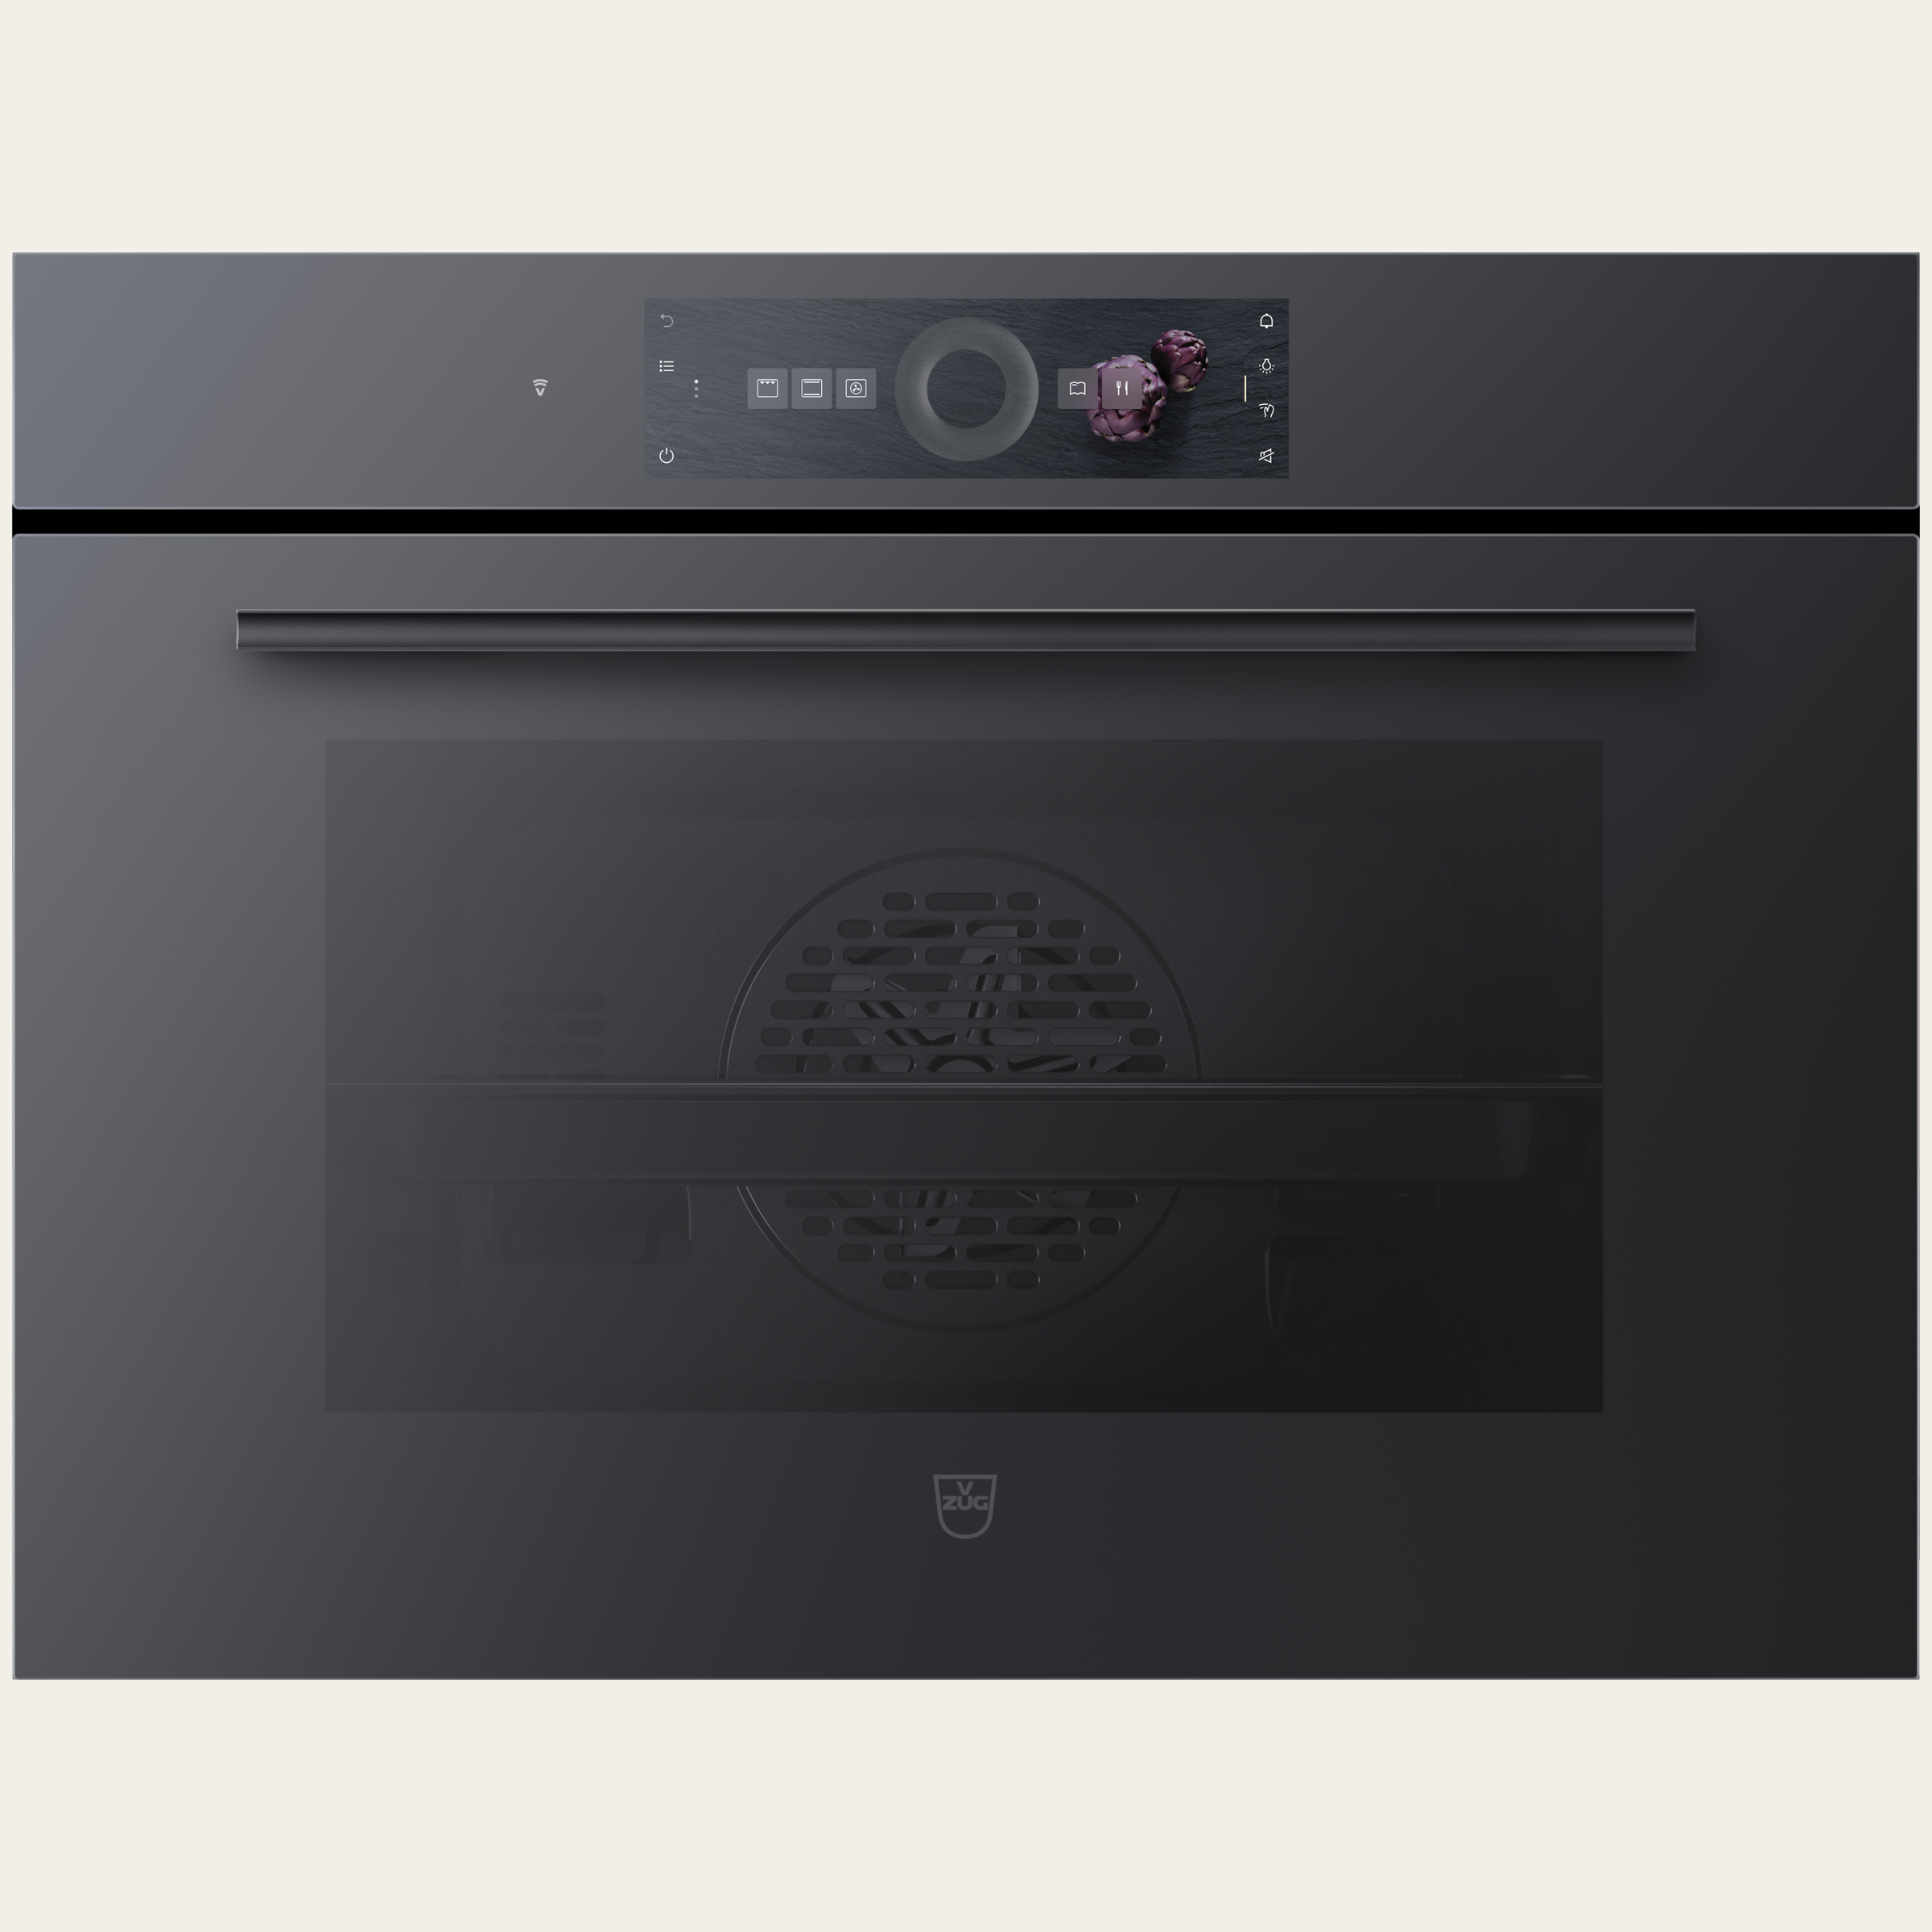 V-ZUG Oven Combair V6000 45P, Standard width: 60 cm,Standard height: 45 cm, Black mirror glass, Touchscreen with CircleSlider, V-ZUG-Home, Pyrolytic self-cleaning